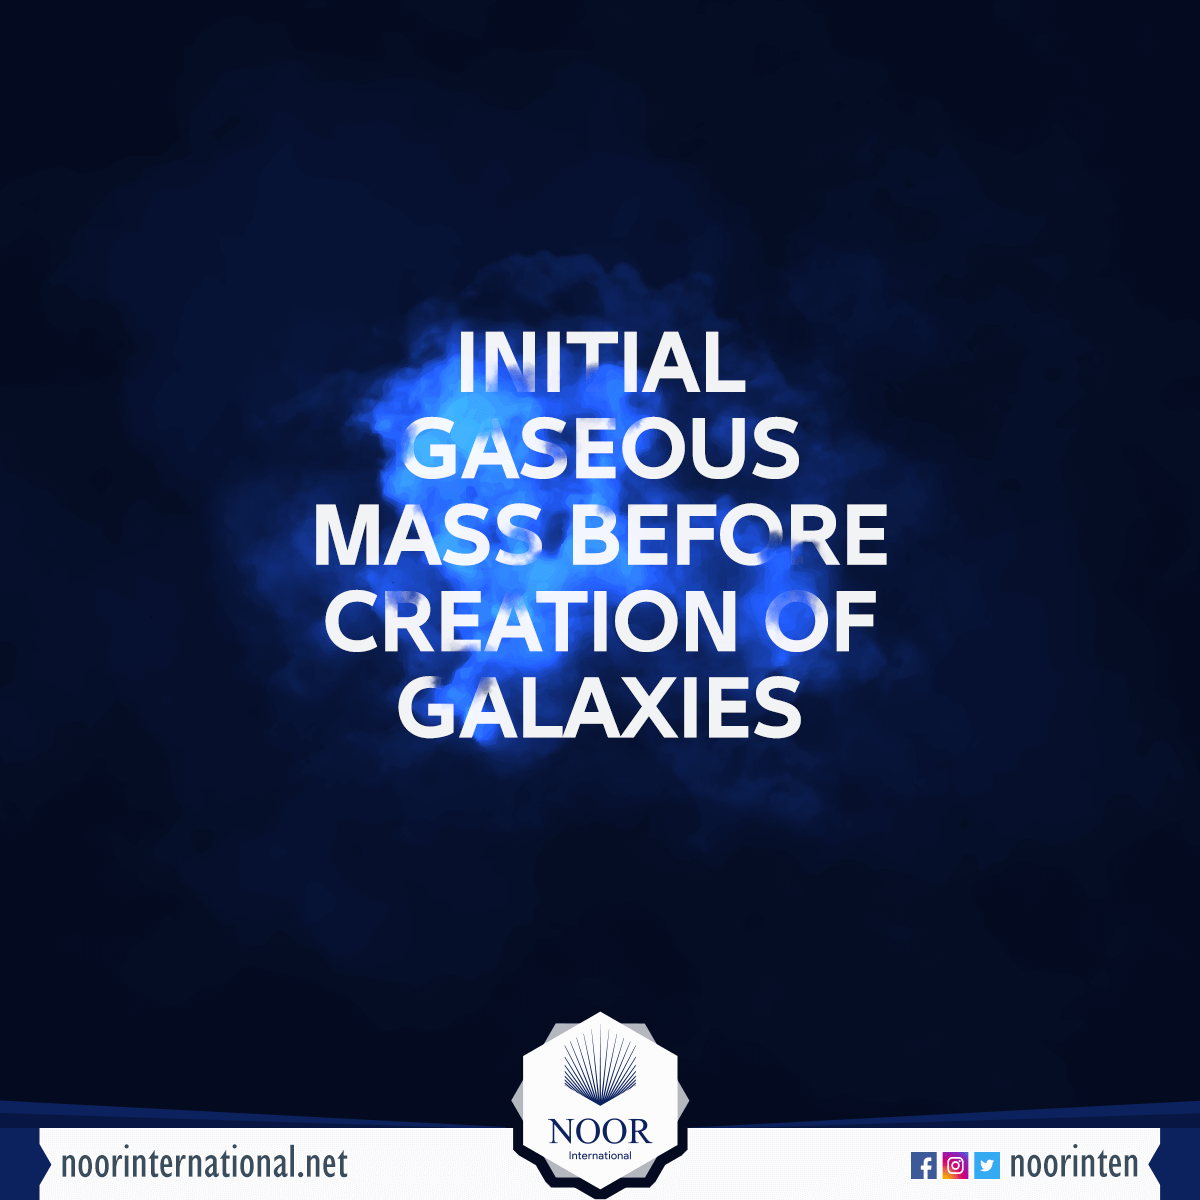 INITIAL GASEOUS MASS BEFORE CREATION OF GALAXIES